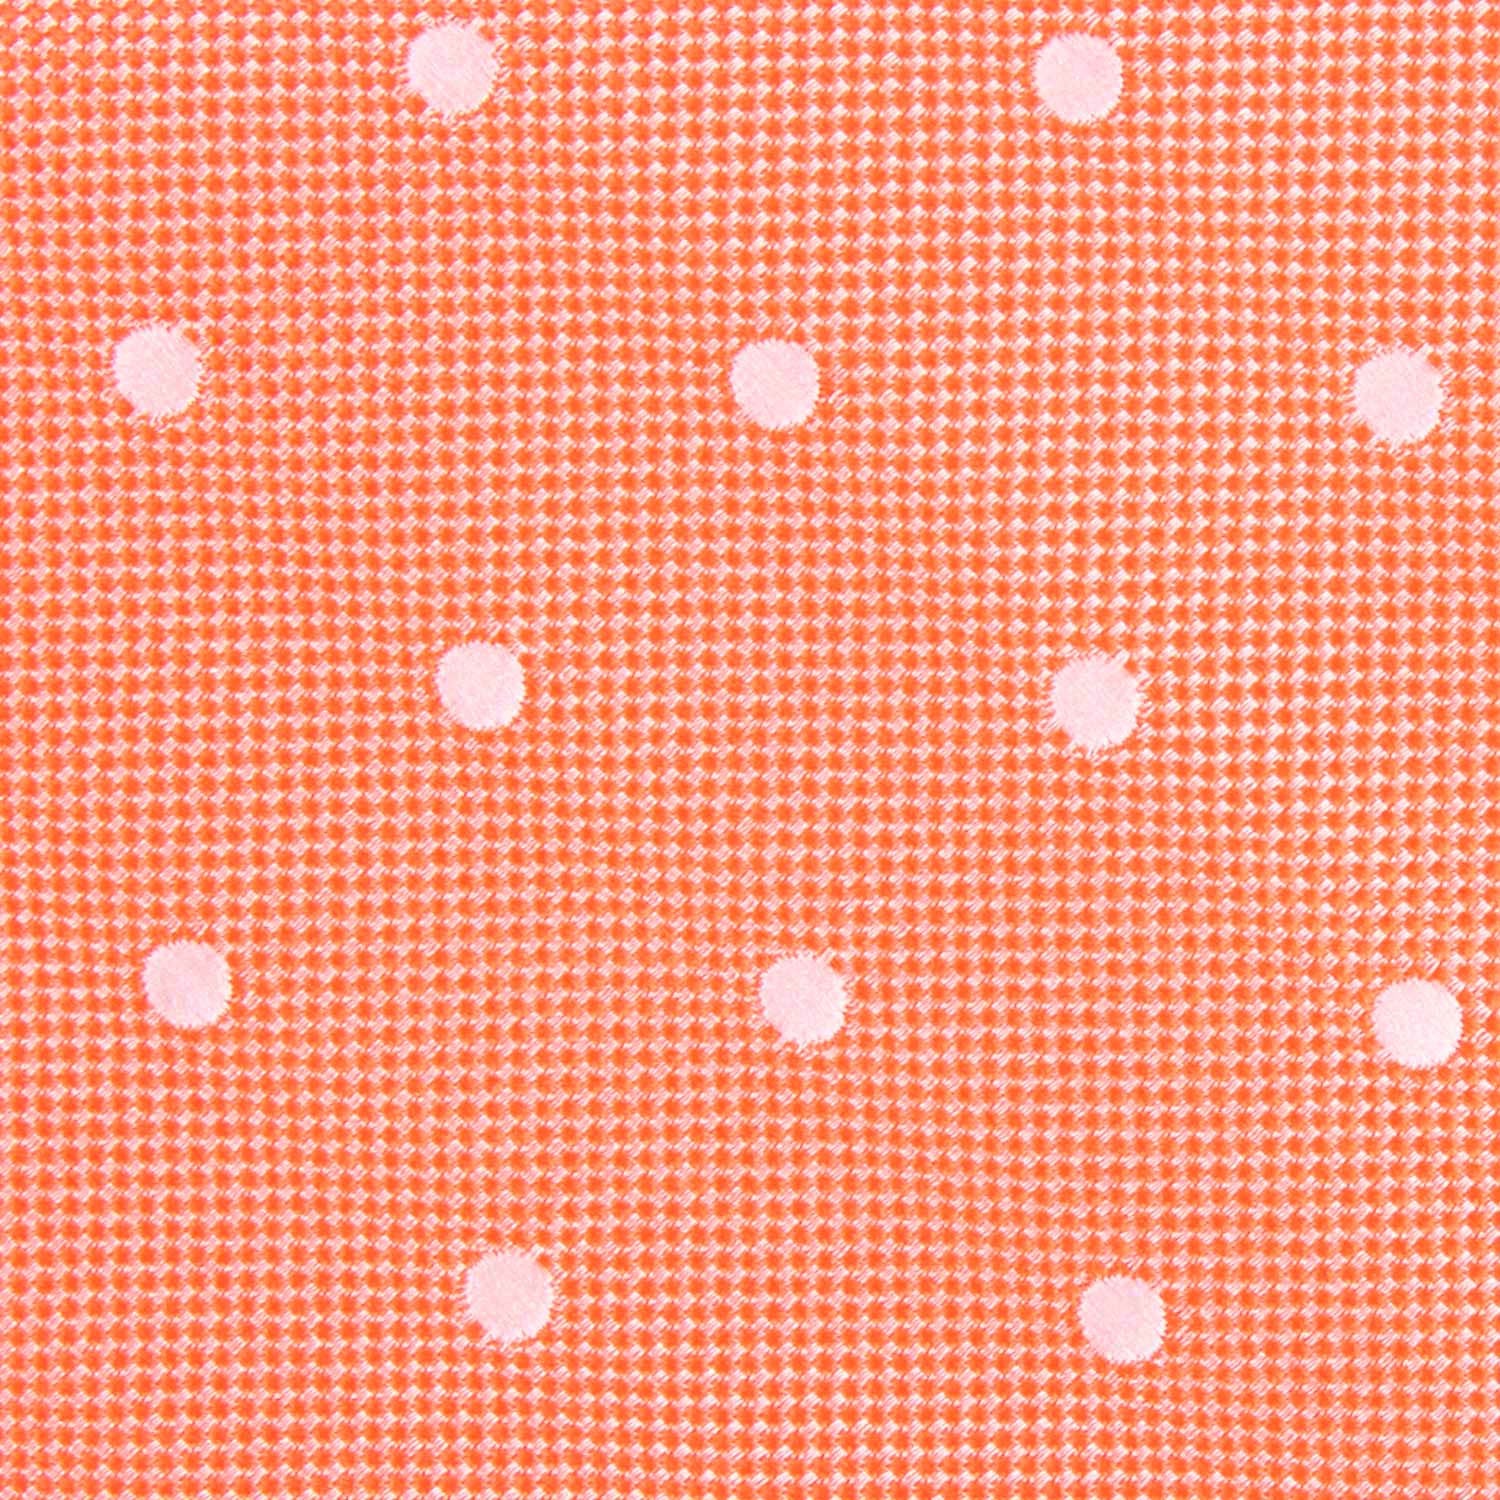 Coral Orange with White Polka Dots Fabric Bow Tie M142